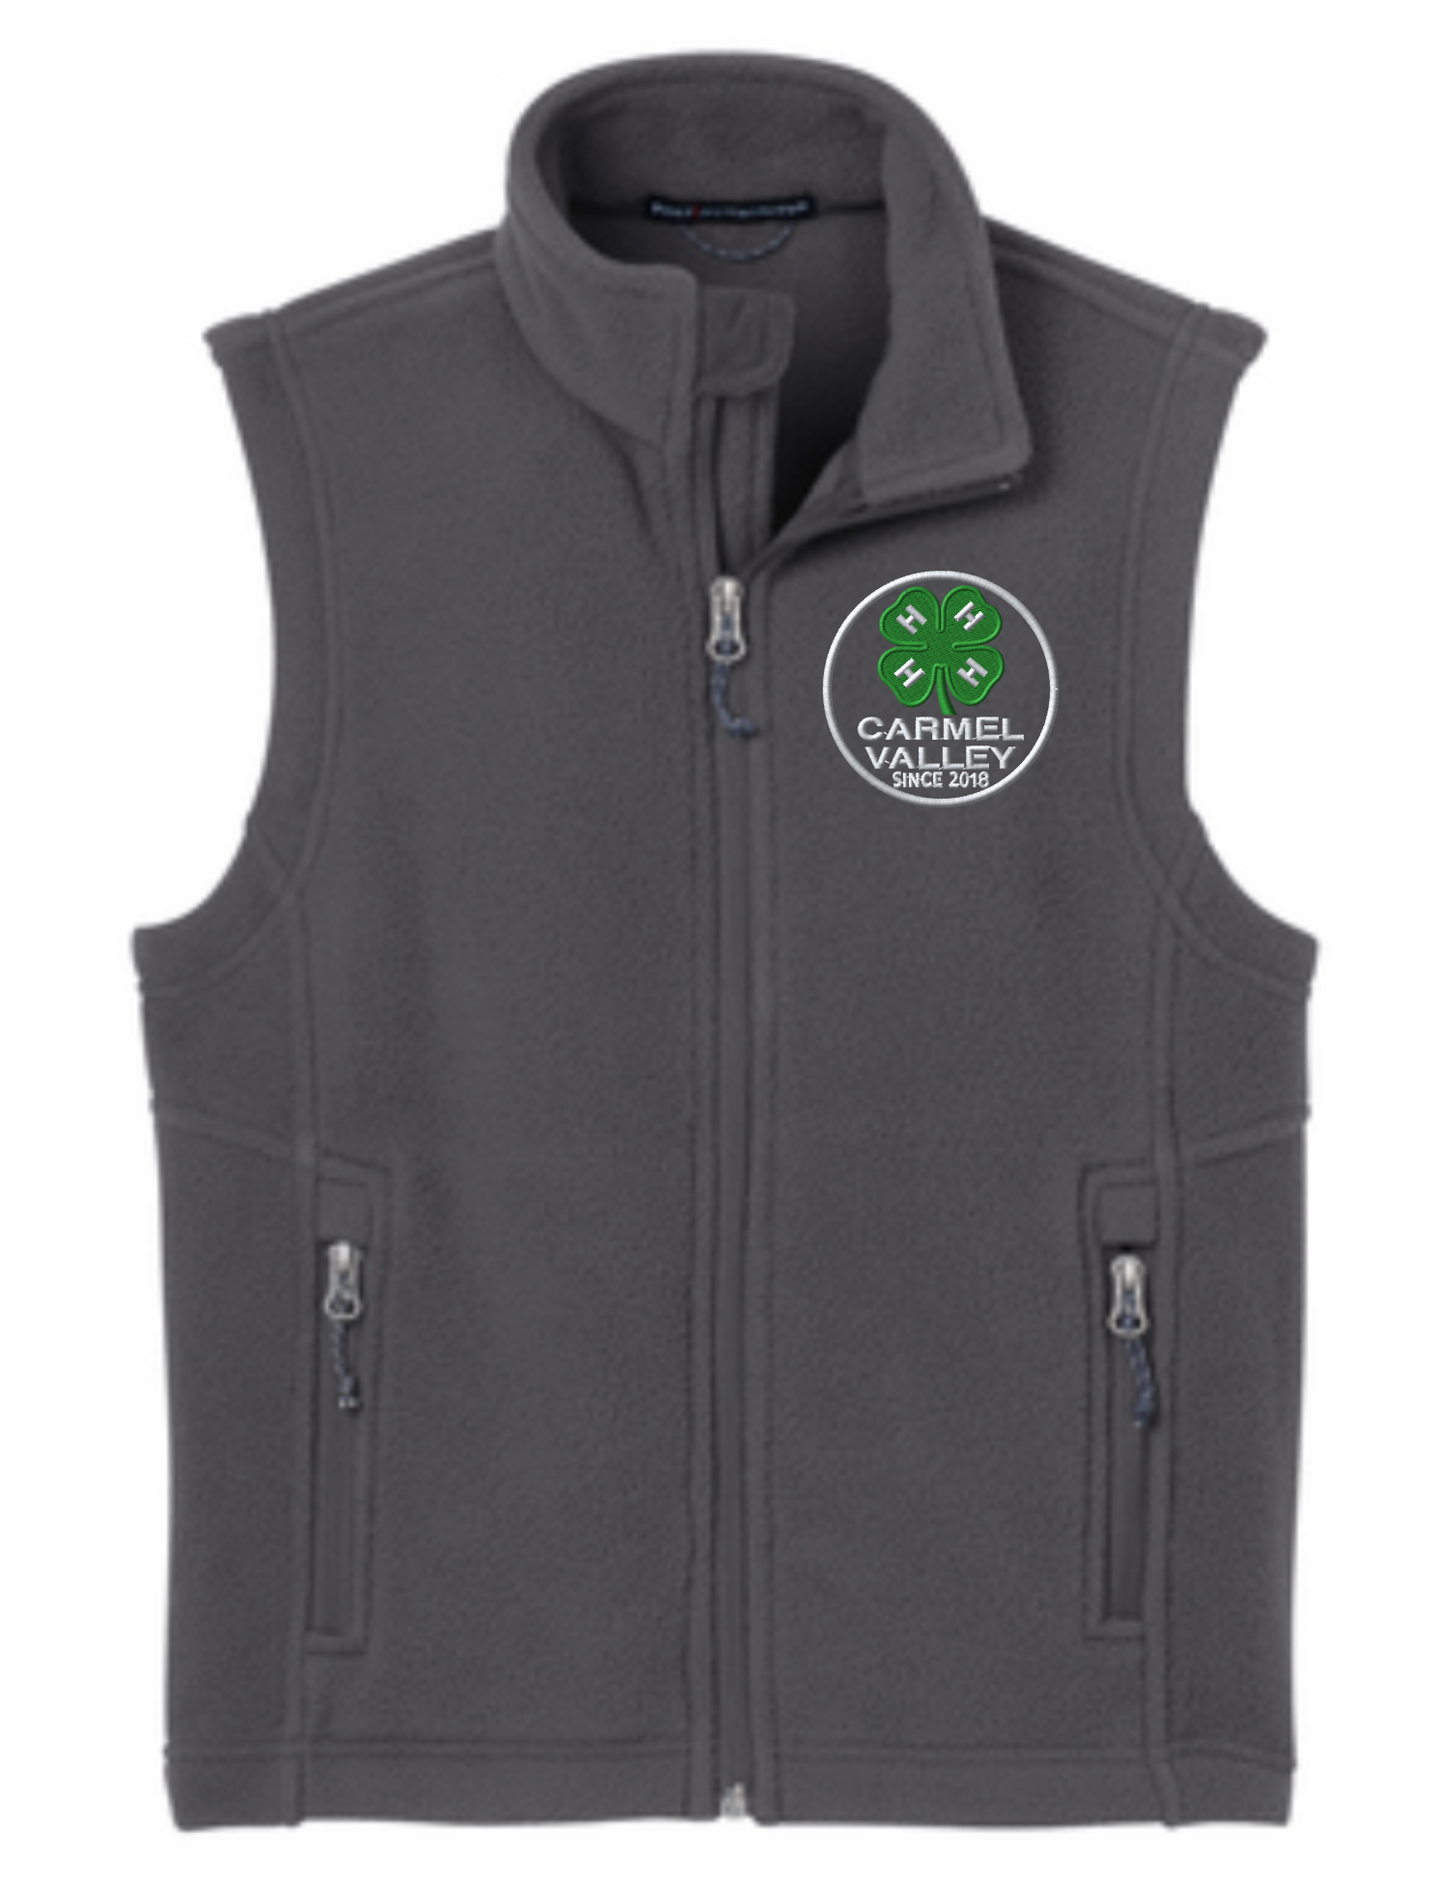 Youth Carmel Valley Personalized 4-H Port Authority Fleece Vest